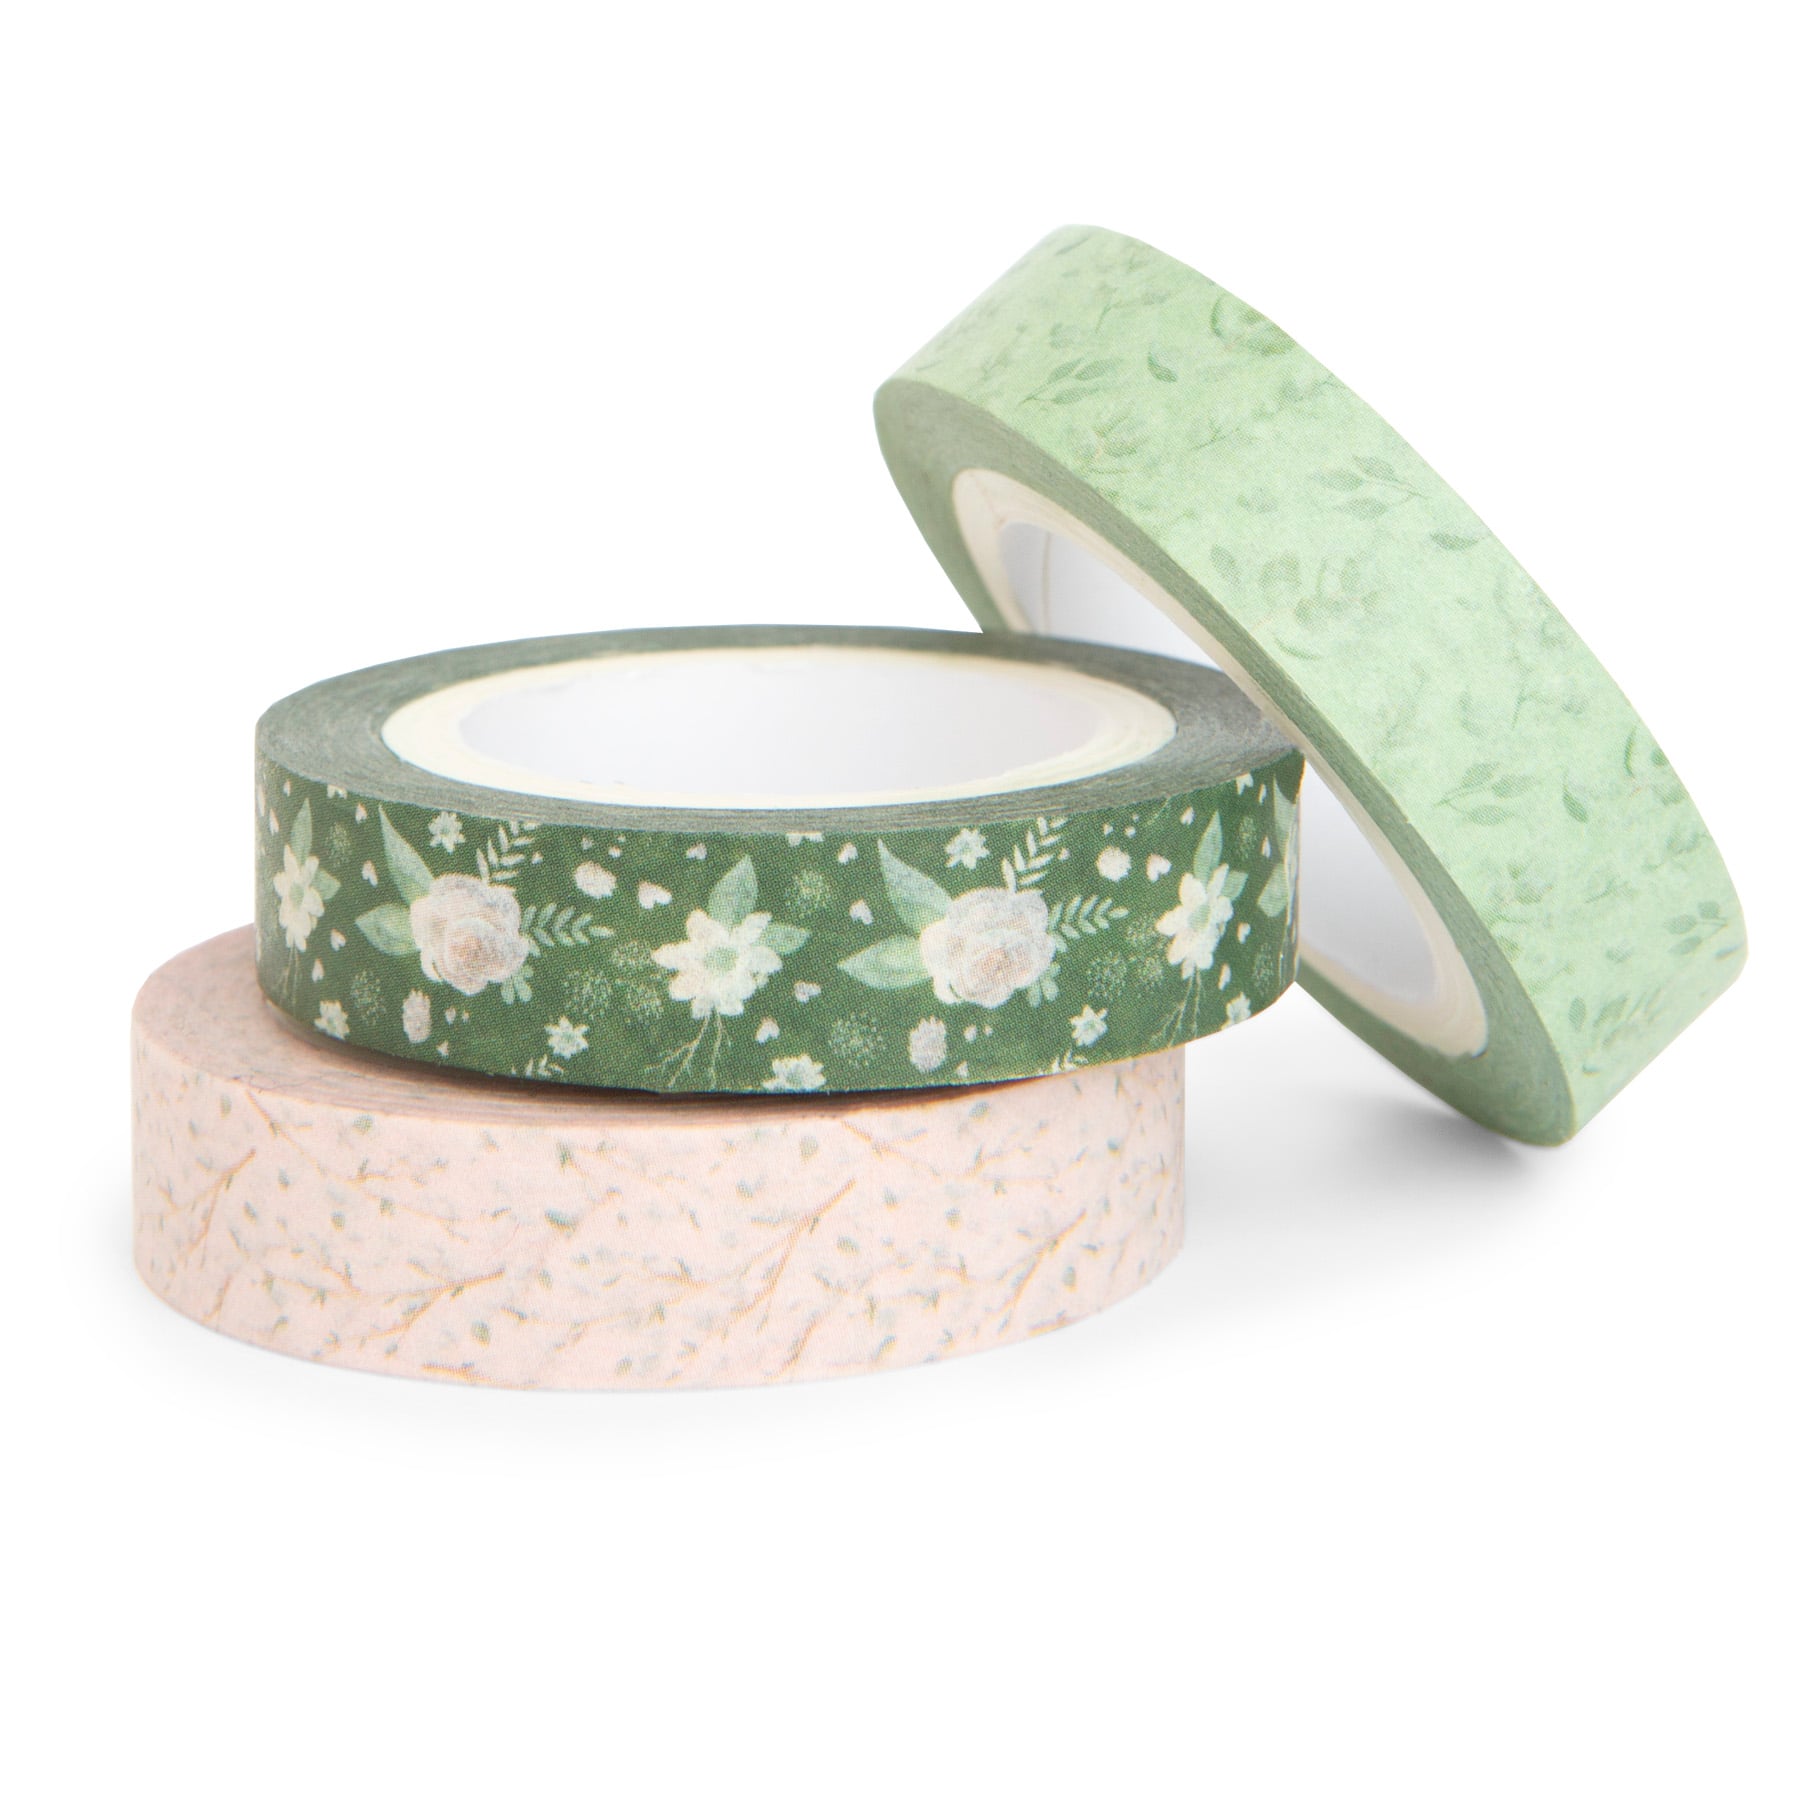 Narrow Glitter Crafting Tape Set by Recollections | Michaels